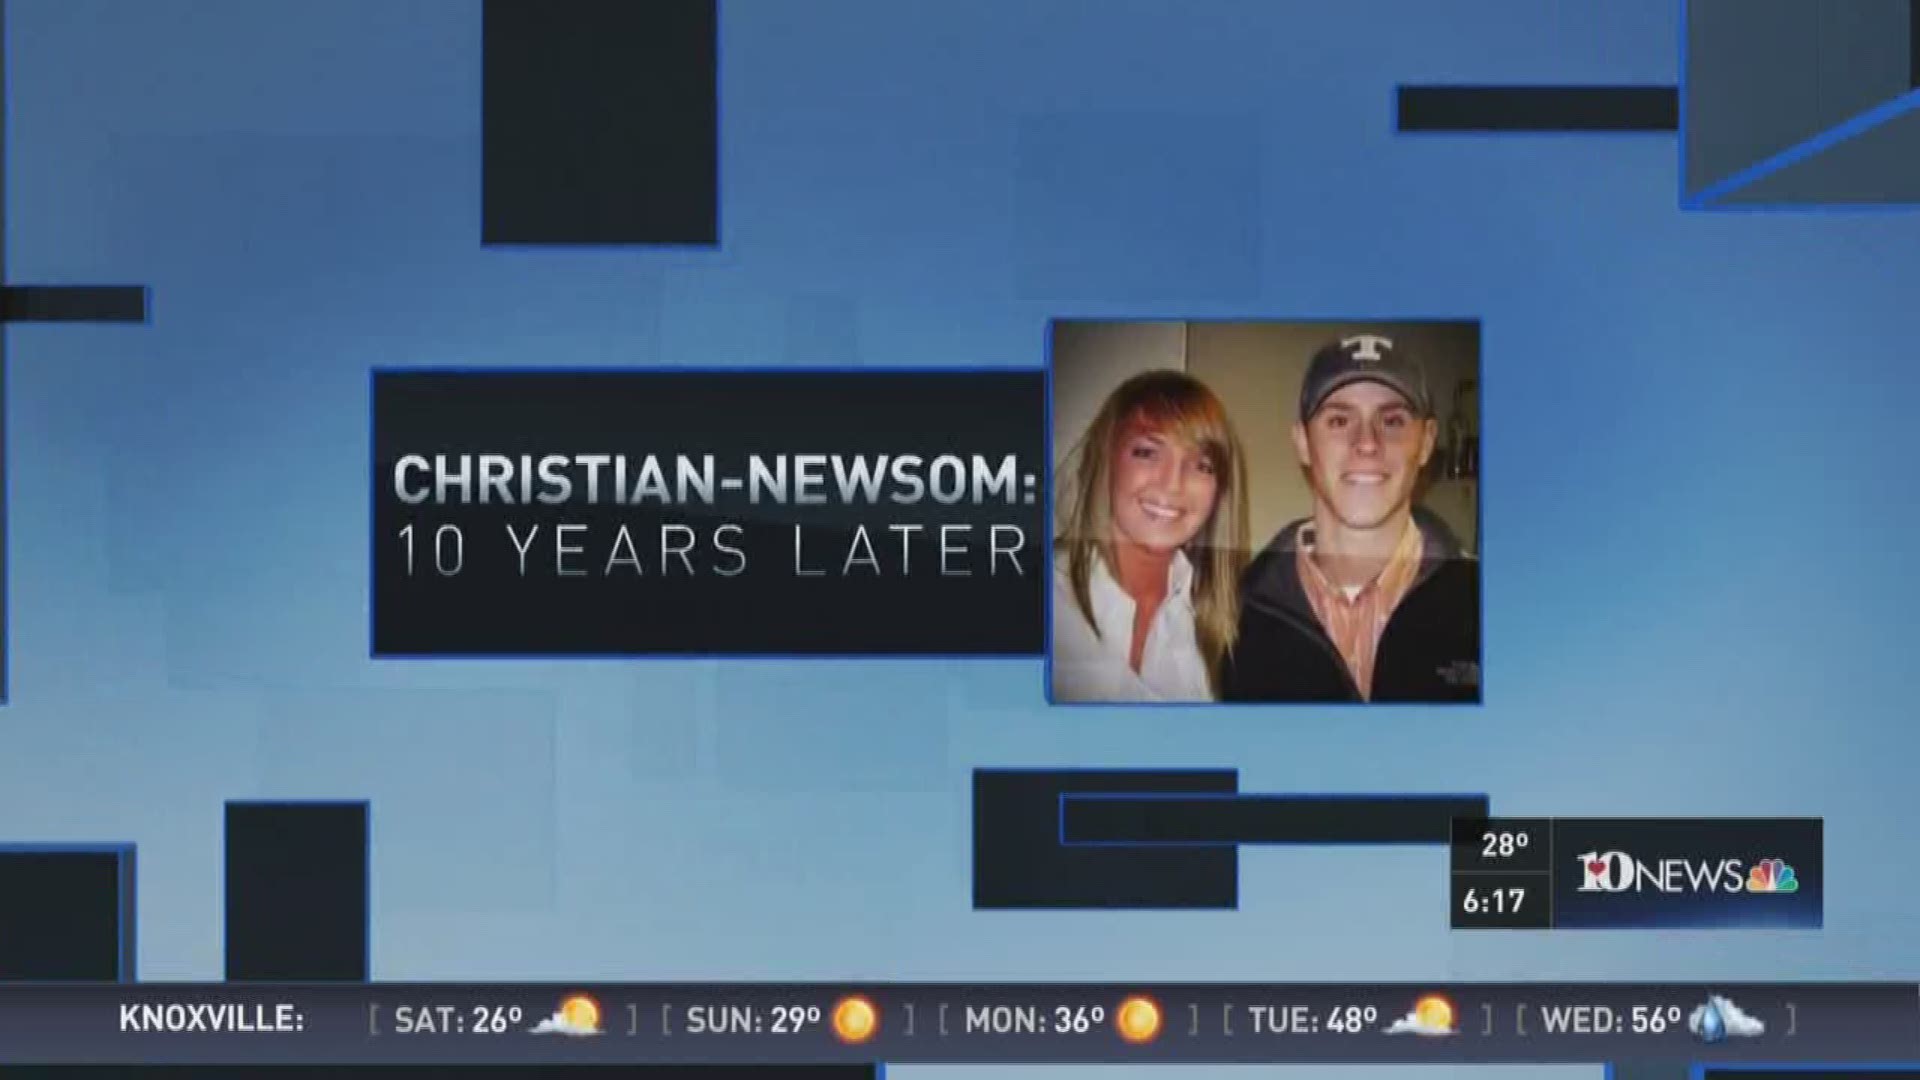 The family of Chris Newsom continues to fight for justice 10 years after his murder.